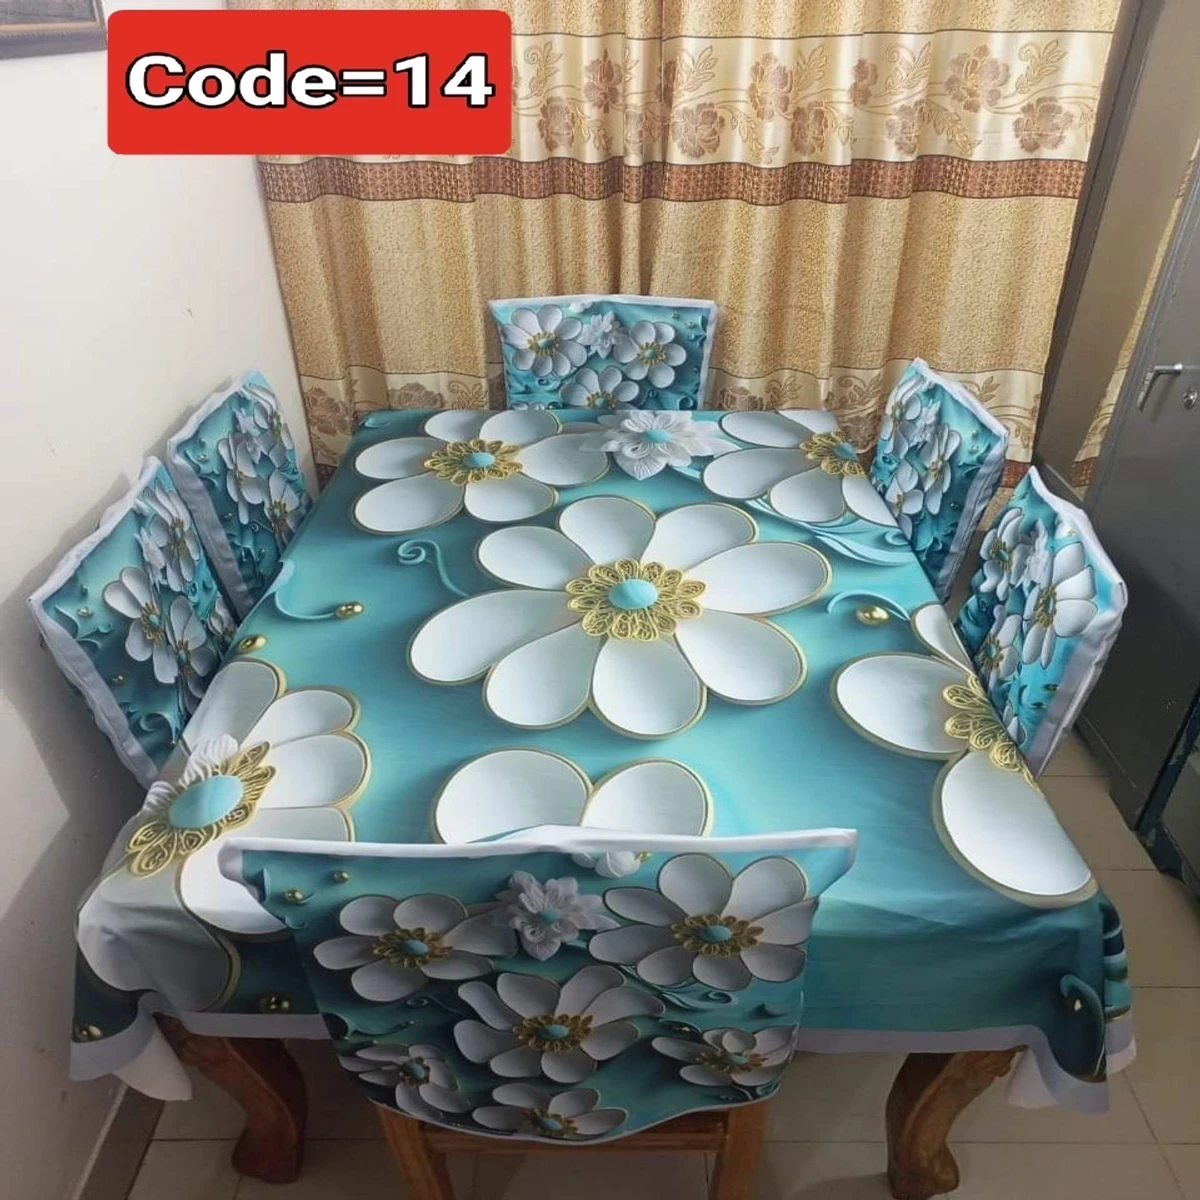 3D Pint Dining Table and Chair Cover Code = 14